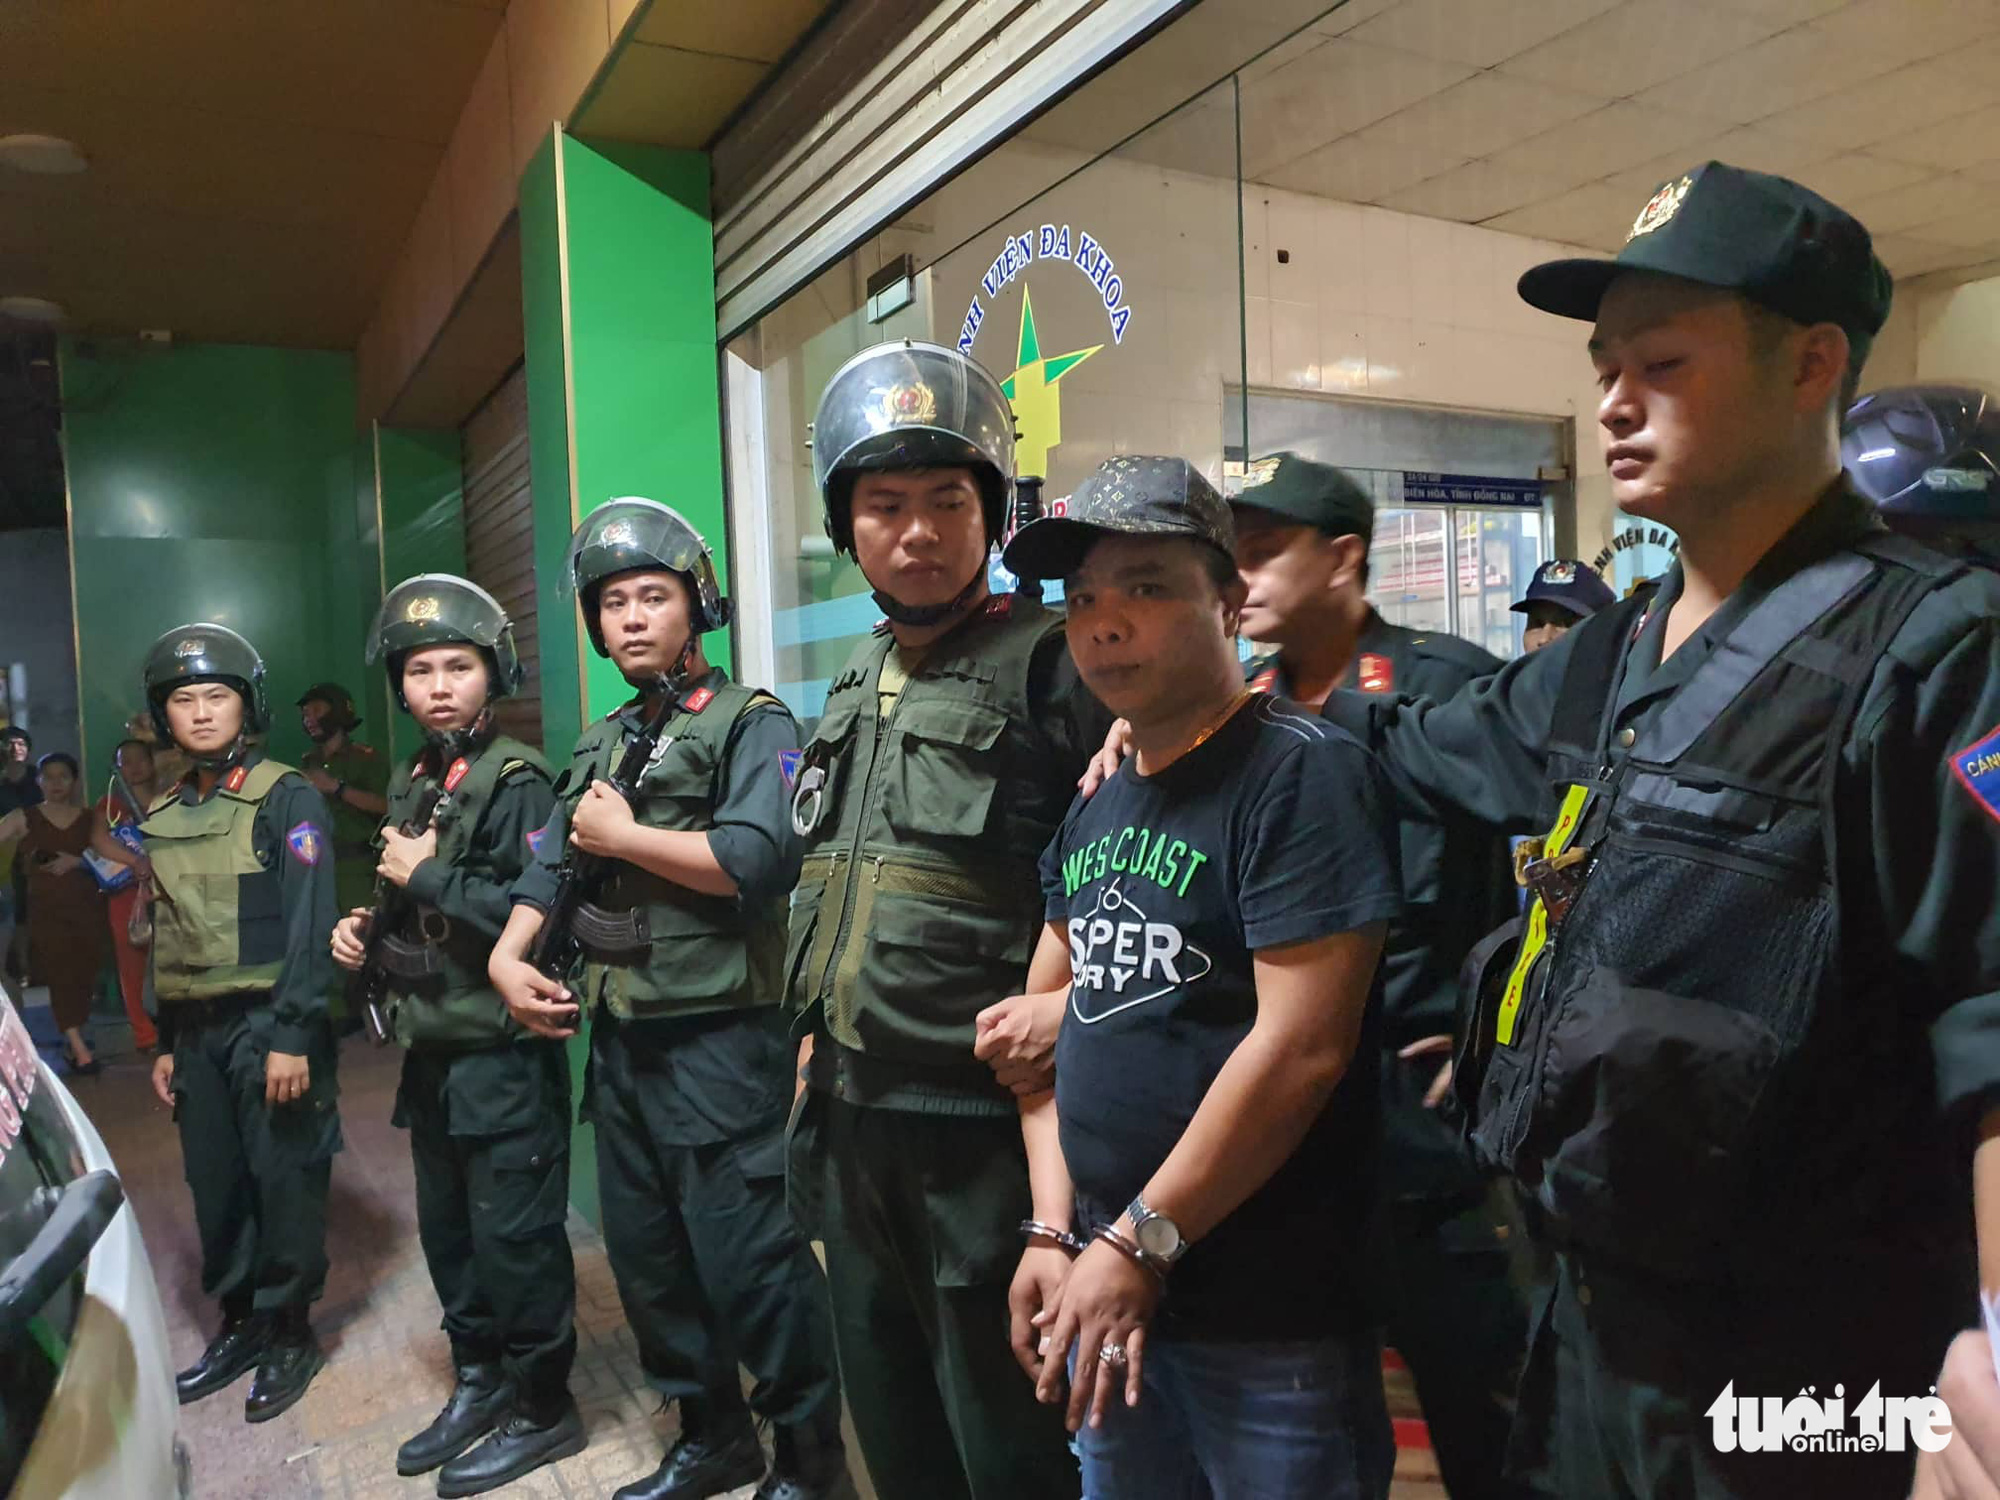 Police nab 10 members of debt collection gang in southern Vietnamese province